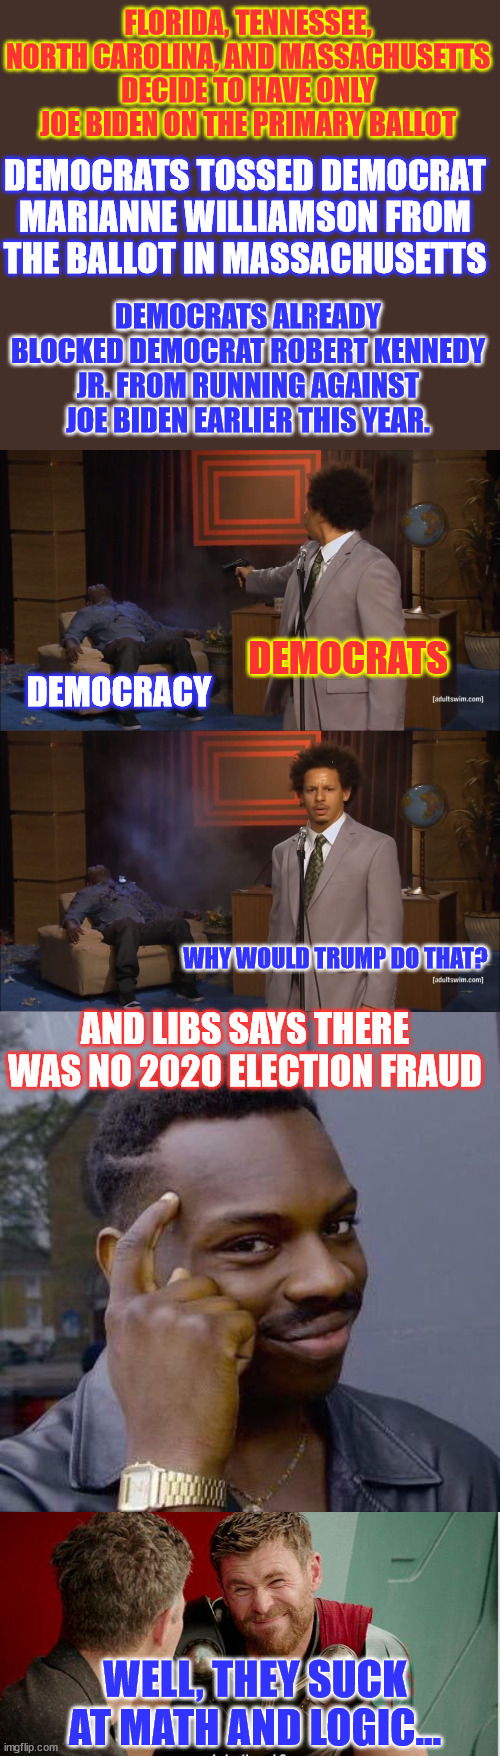 The logic and the facts all point to democrat election fraud. | FLORIDA, TENNESSEE, NORTH CAROLINA, AND MASSACHUSETTS DECIDE TO HAVE ONLY JOE BIDEN ON THE PRIMARY BALLOT; DEMOCRATS TOSSED DEMOCRAT MARIANNE WILLIAMSON FROM THE BALLOT IN MASSACHUSETTS; DEMOCRATS ALREADY BLOCKED DEMOCRAT ROBERT KENNEDY JR. FROM RUNNING AGAINST JOE BIDEN EARLIER THIS YEAR. DEMOCRATS; DEMOCRACY; WHY WOULD TRUMP DO THAT? AND LIBS SAYS THERE WAS NO 2020 ELECTION FRAUD; WELL, THEY SUCK AT MATH AND LOGIC... | image tagged in memes,who killed hannibal,thinking black guy,thor is he though,anti-democracy,cult | made w/ Imgflip meme maker